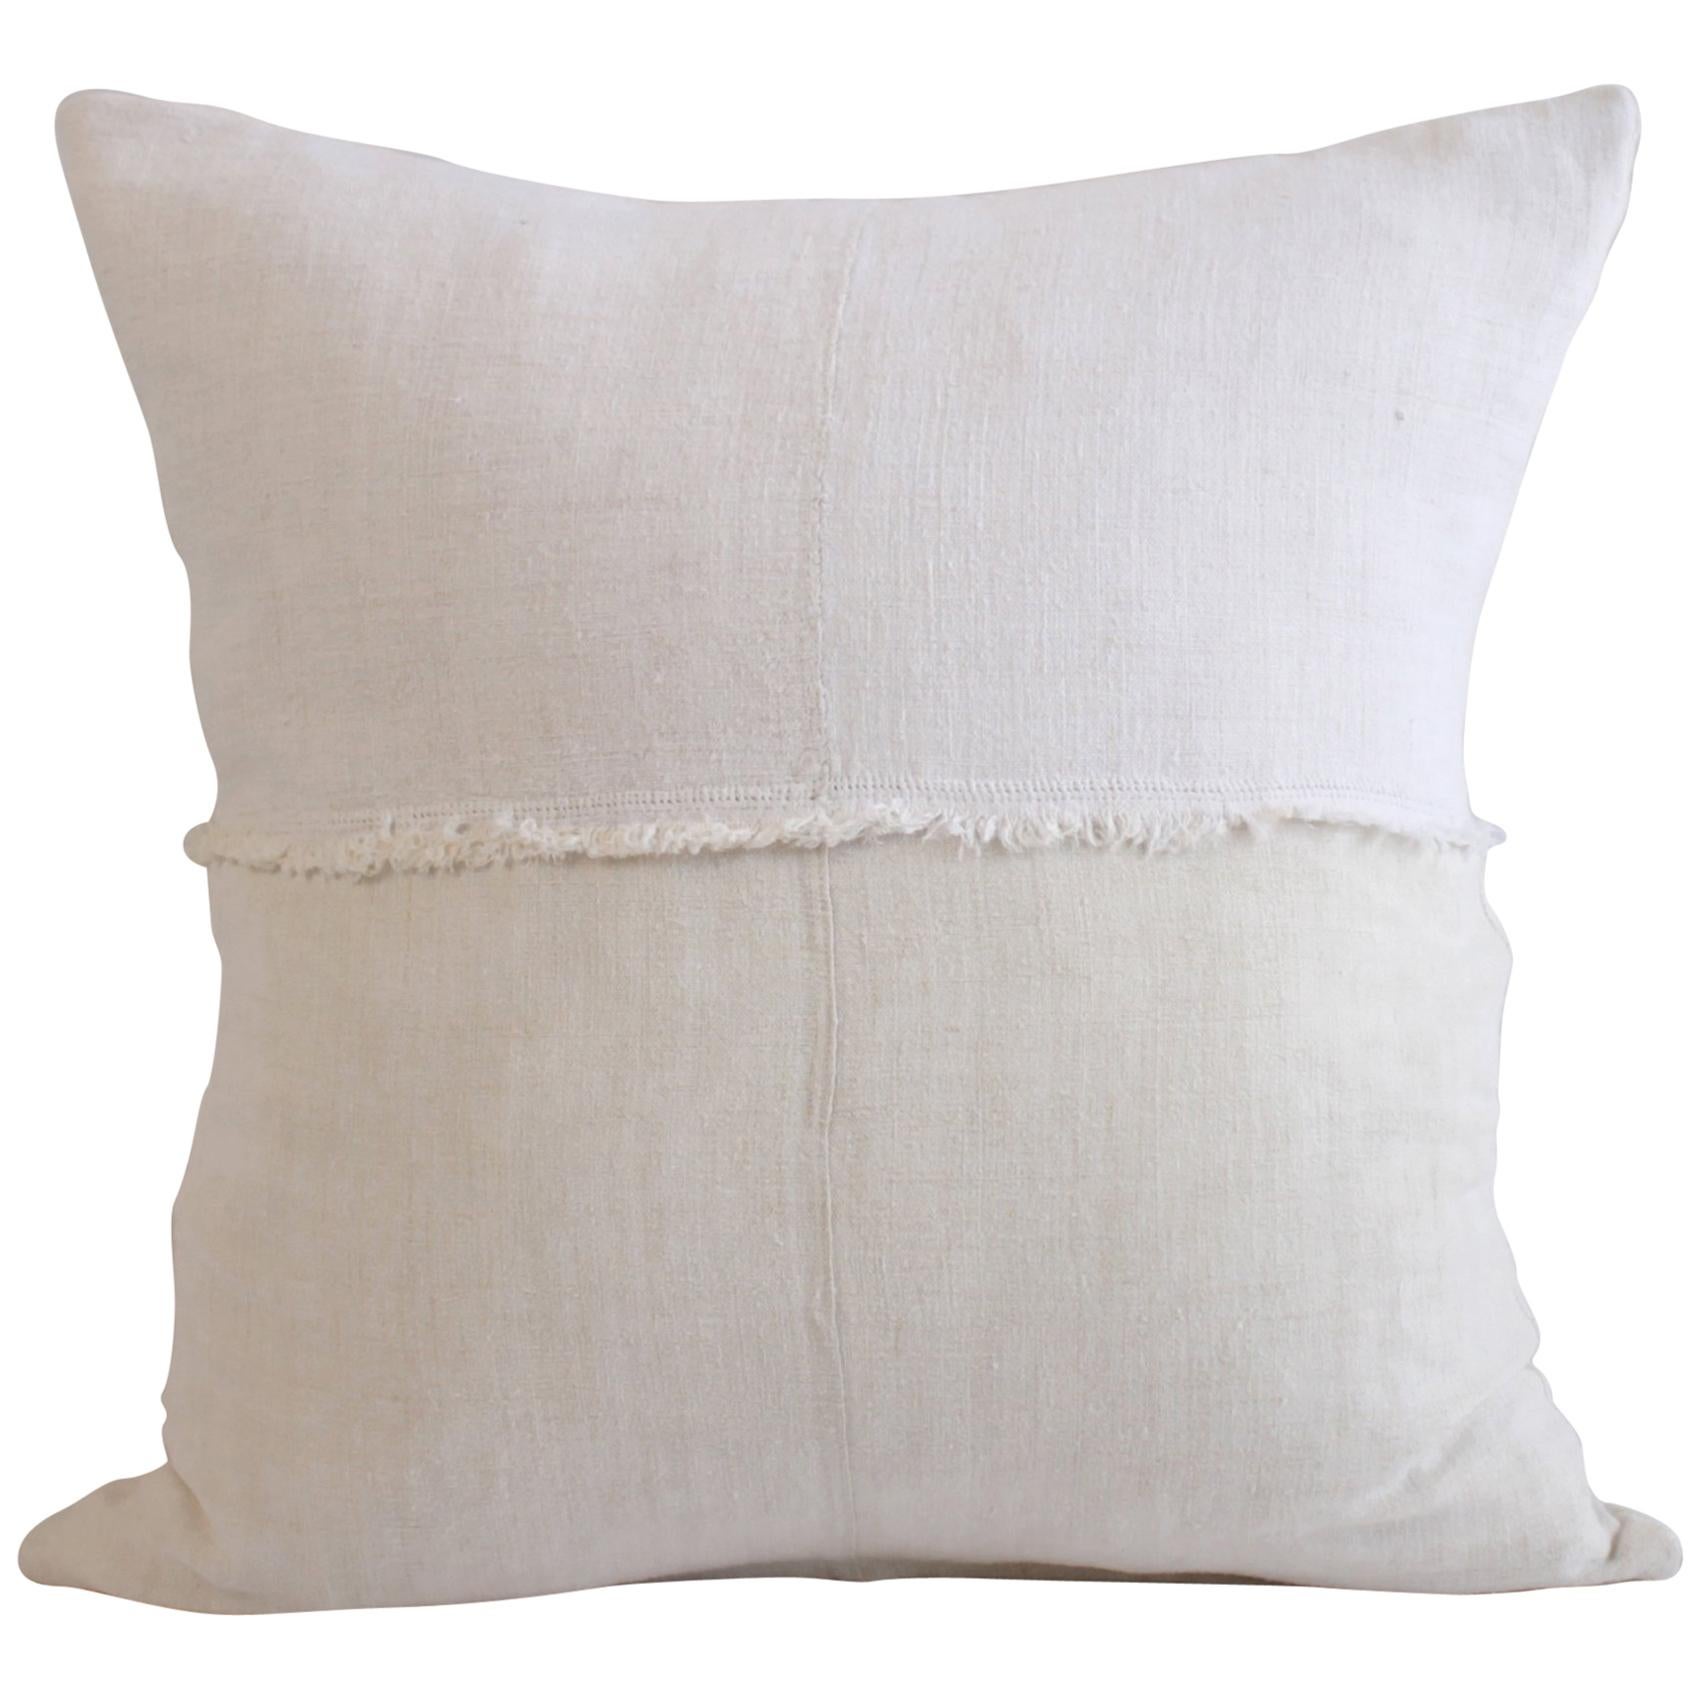 French Linen Pillow in Off White with Fray Details